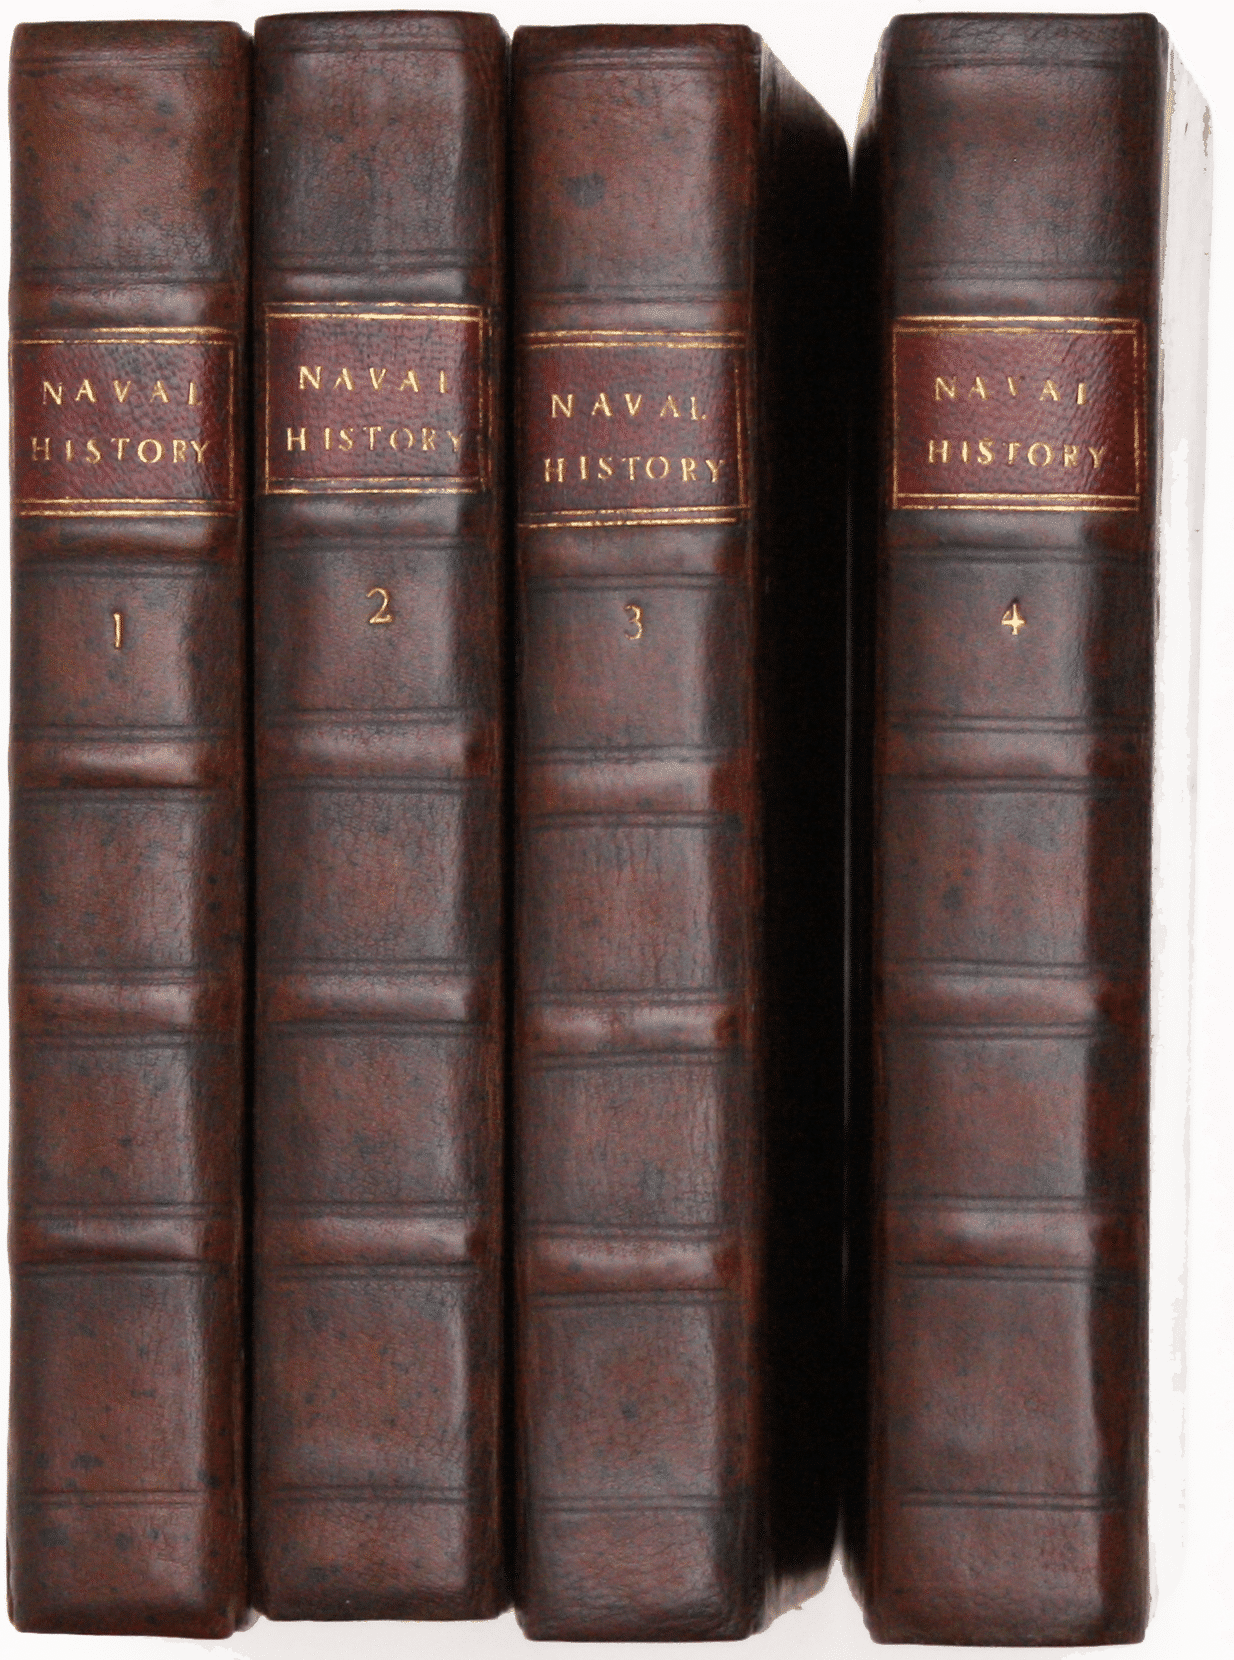 Barrow’s Naval History, First Edition